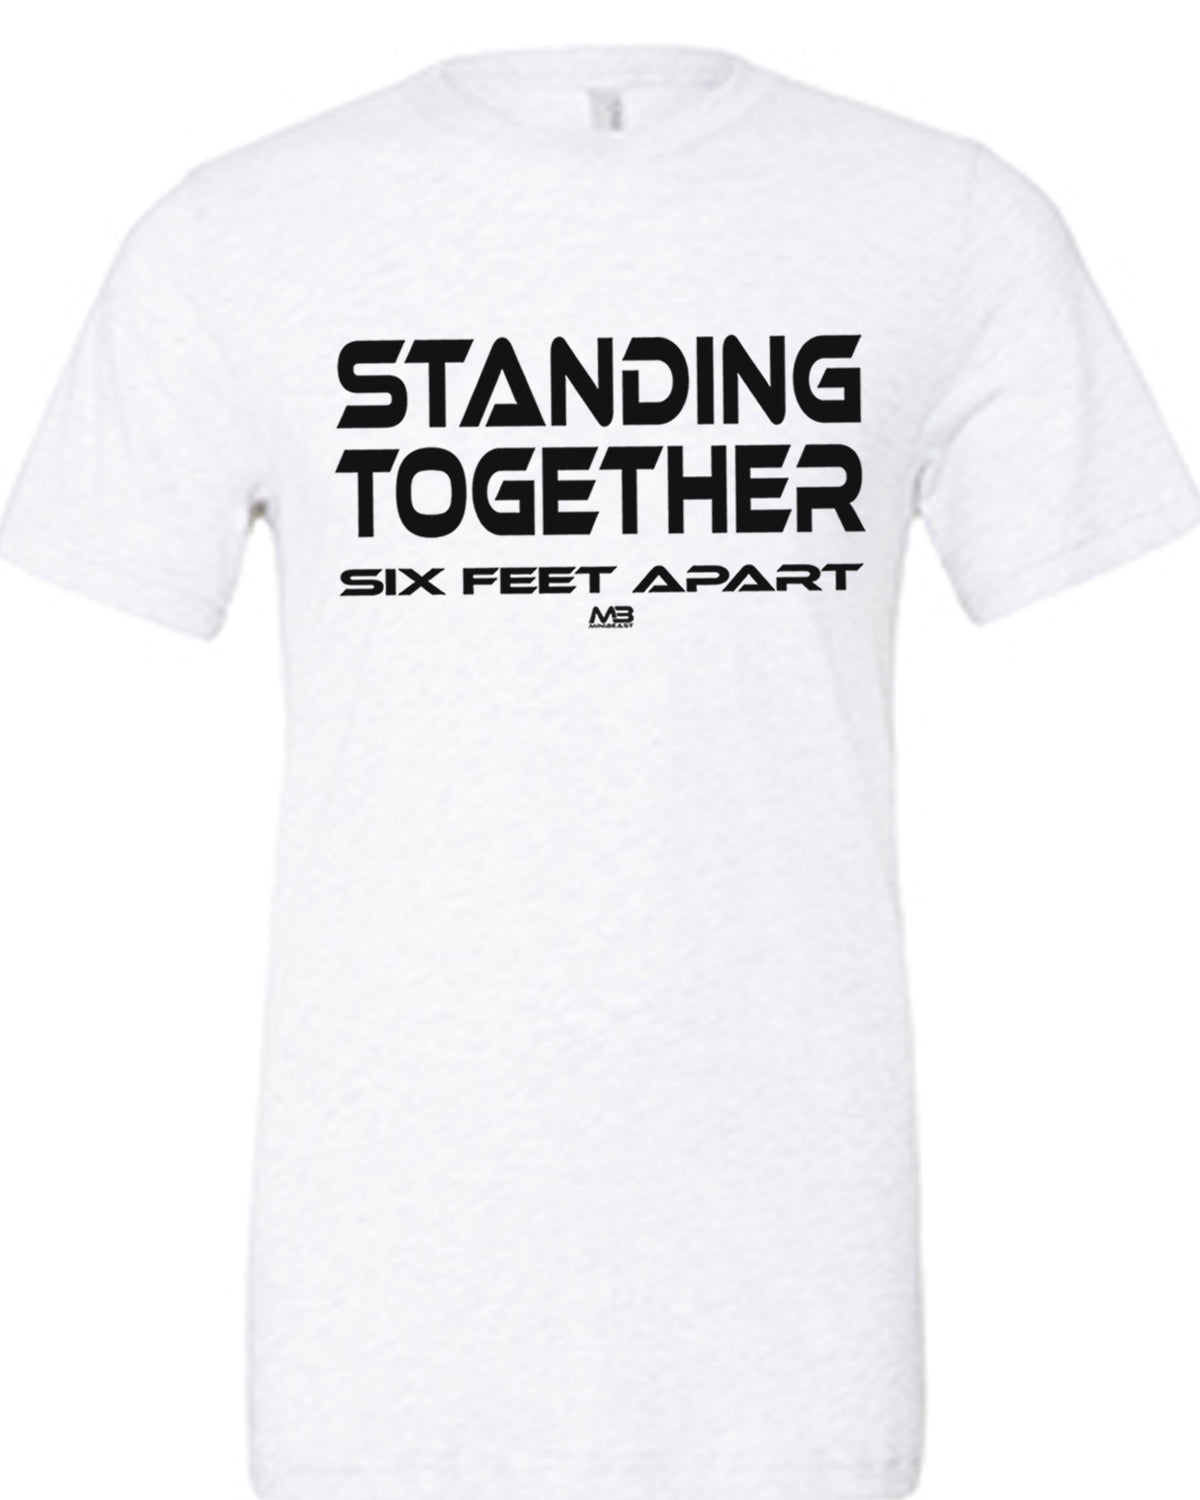 Unisex "Standing Together" Tee